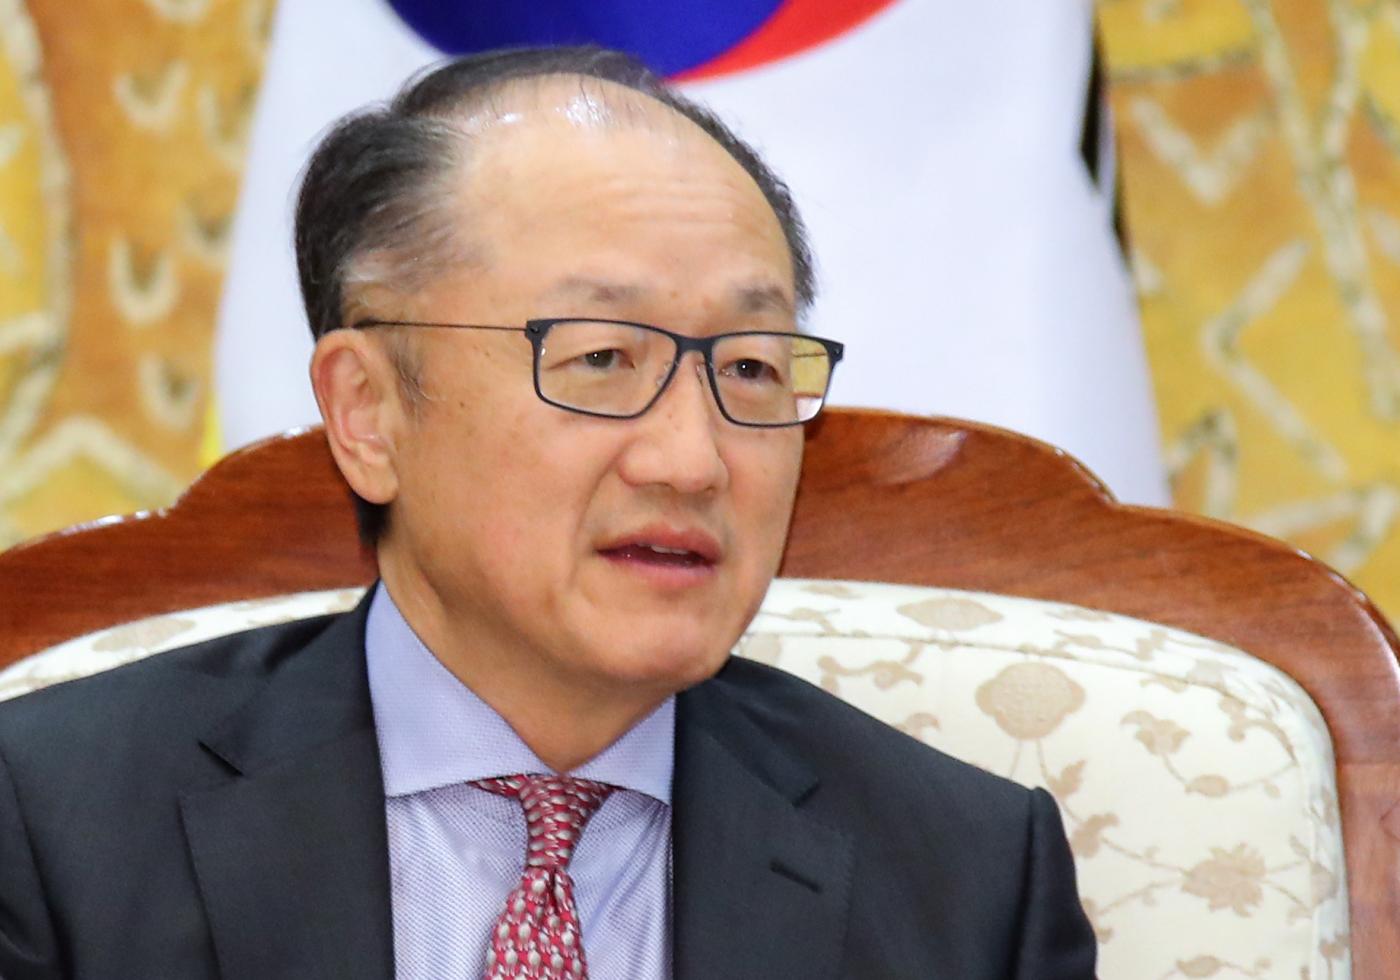 Seoul: This file photo dated May 25, 2018, shows Jim Yong Kim, president of the World Bank, visiting the presidential office Cheong Wa Dae in Seoul. Kim said on Jan. 7, 2019, that he will be stepping down effective Feb. 1, with more than three years left in his current term at the Washington-based multilateral lending agency.(Yonhap/IANS) by .